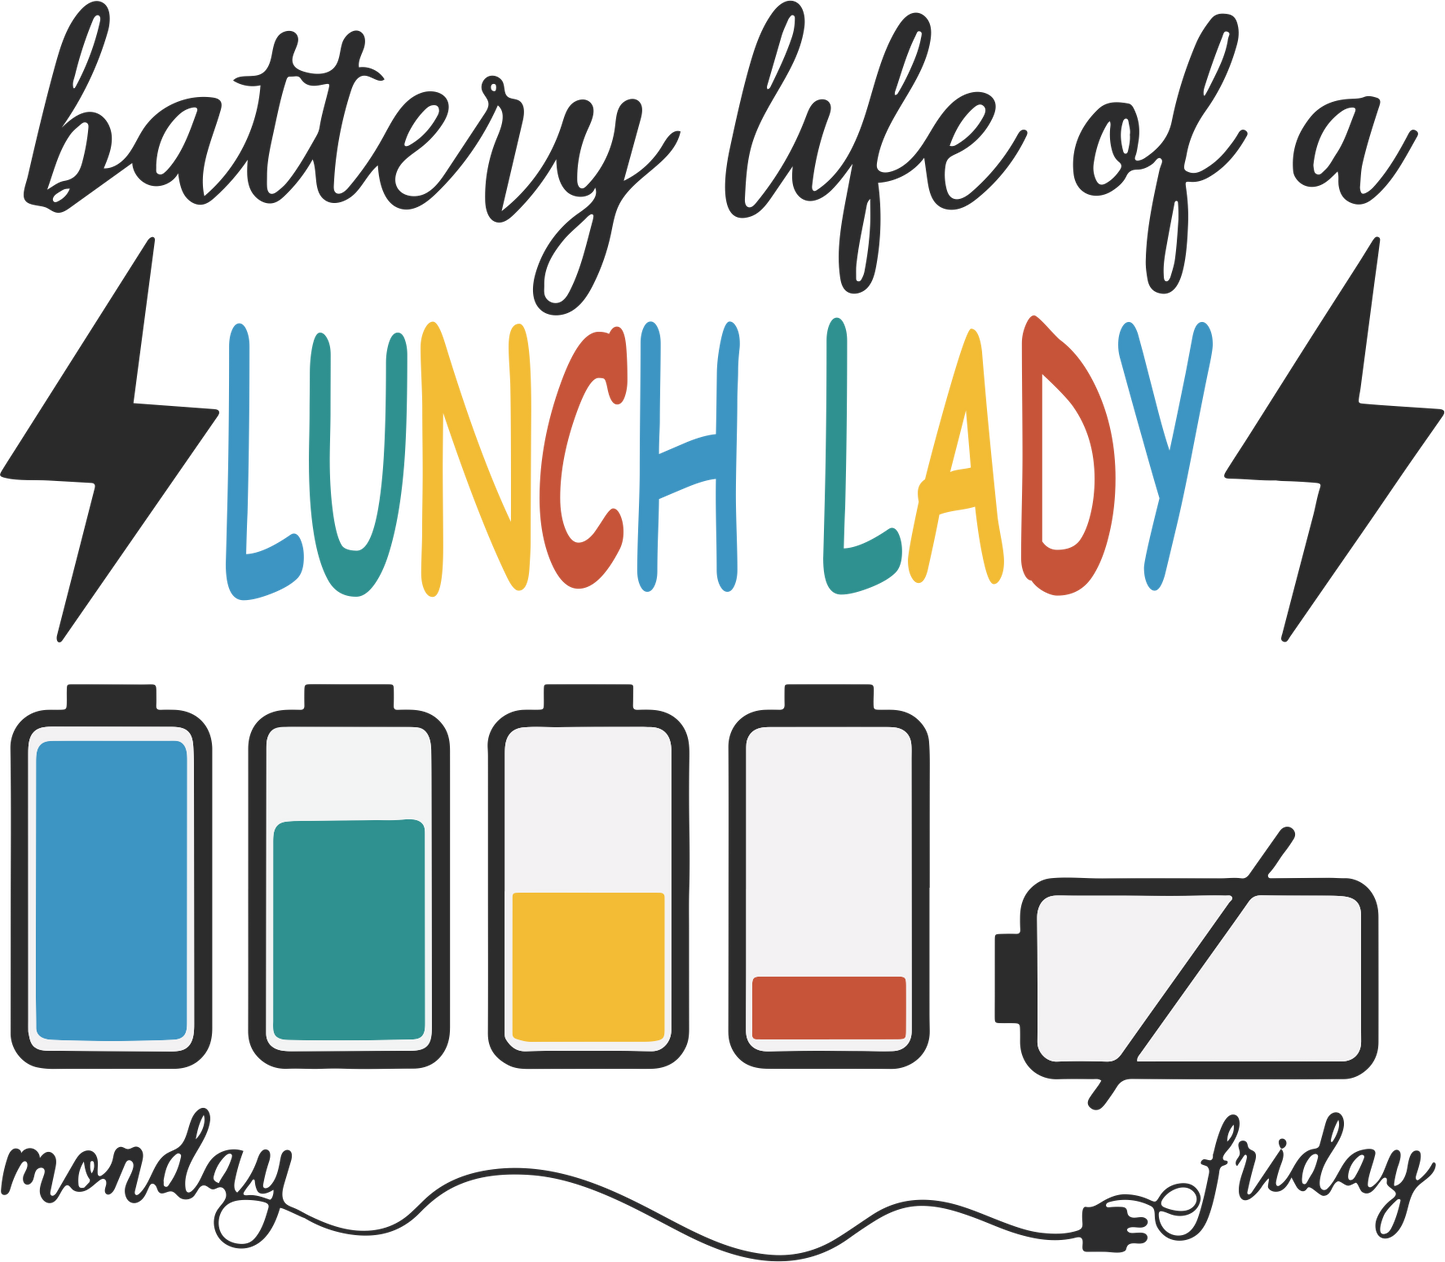 Battery Life-Lunch LadyDesign Transfer